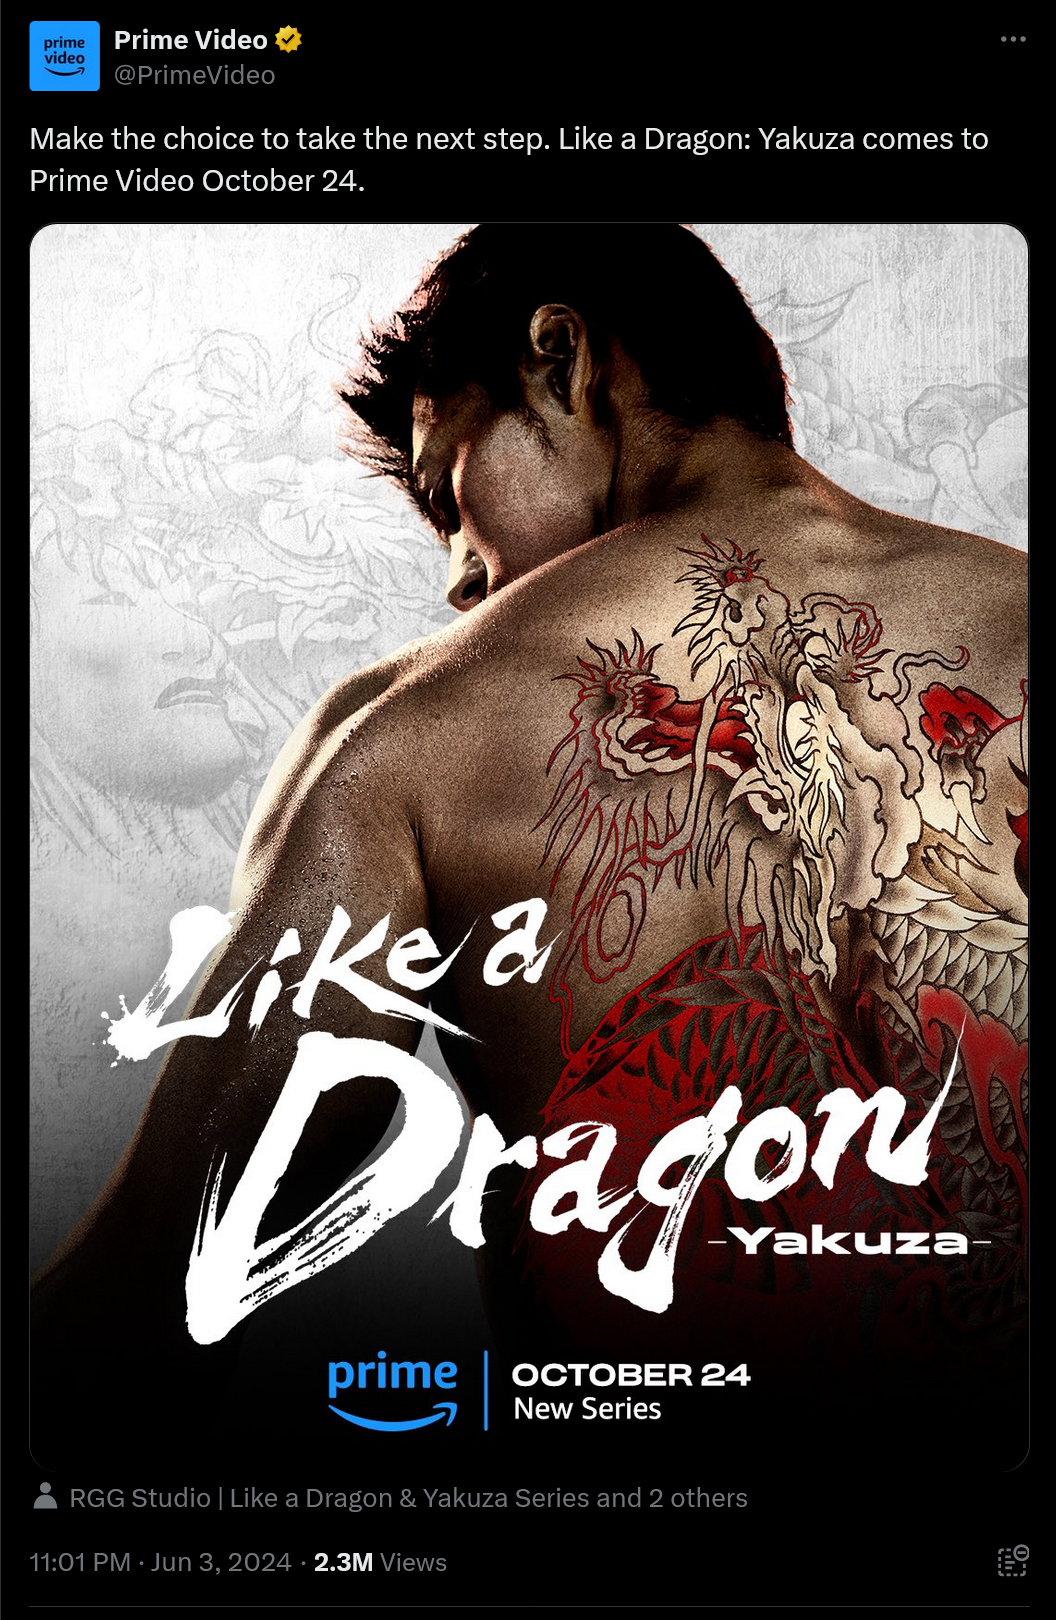 Make the choice to take the next step. Like a Dragon: Yakuza comes to Prime Video October 24.